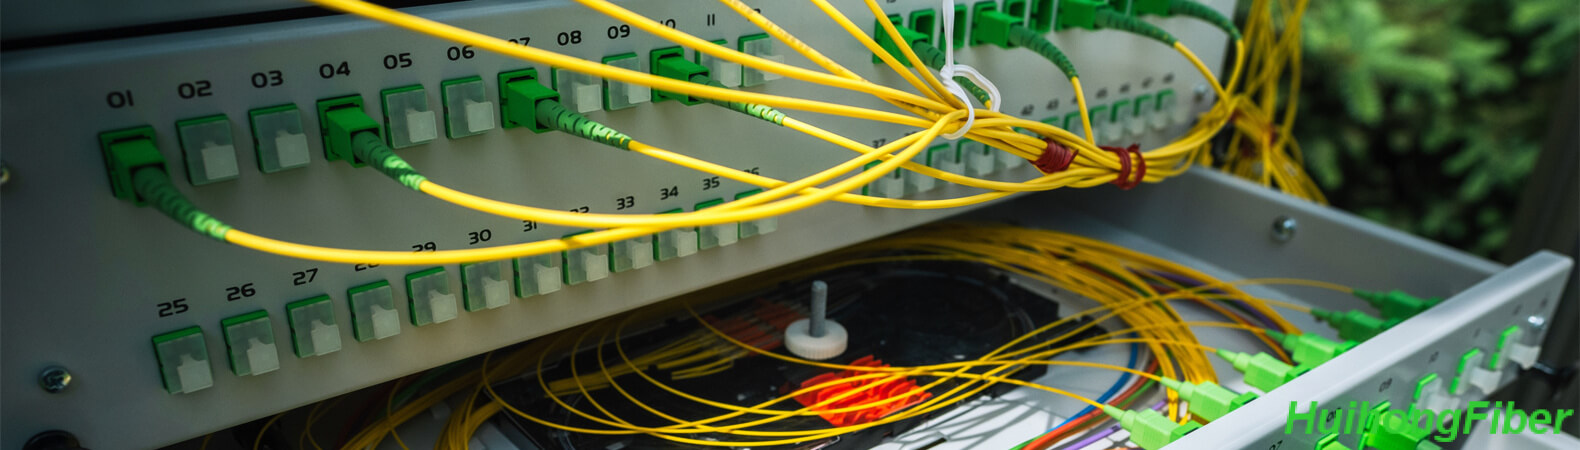 splice trays in fiber optic cable management and organization